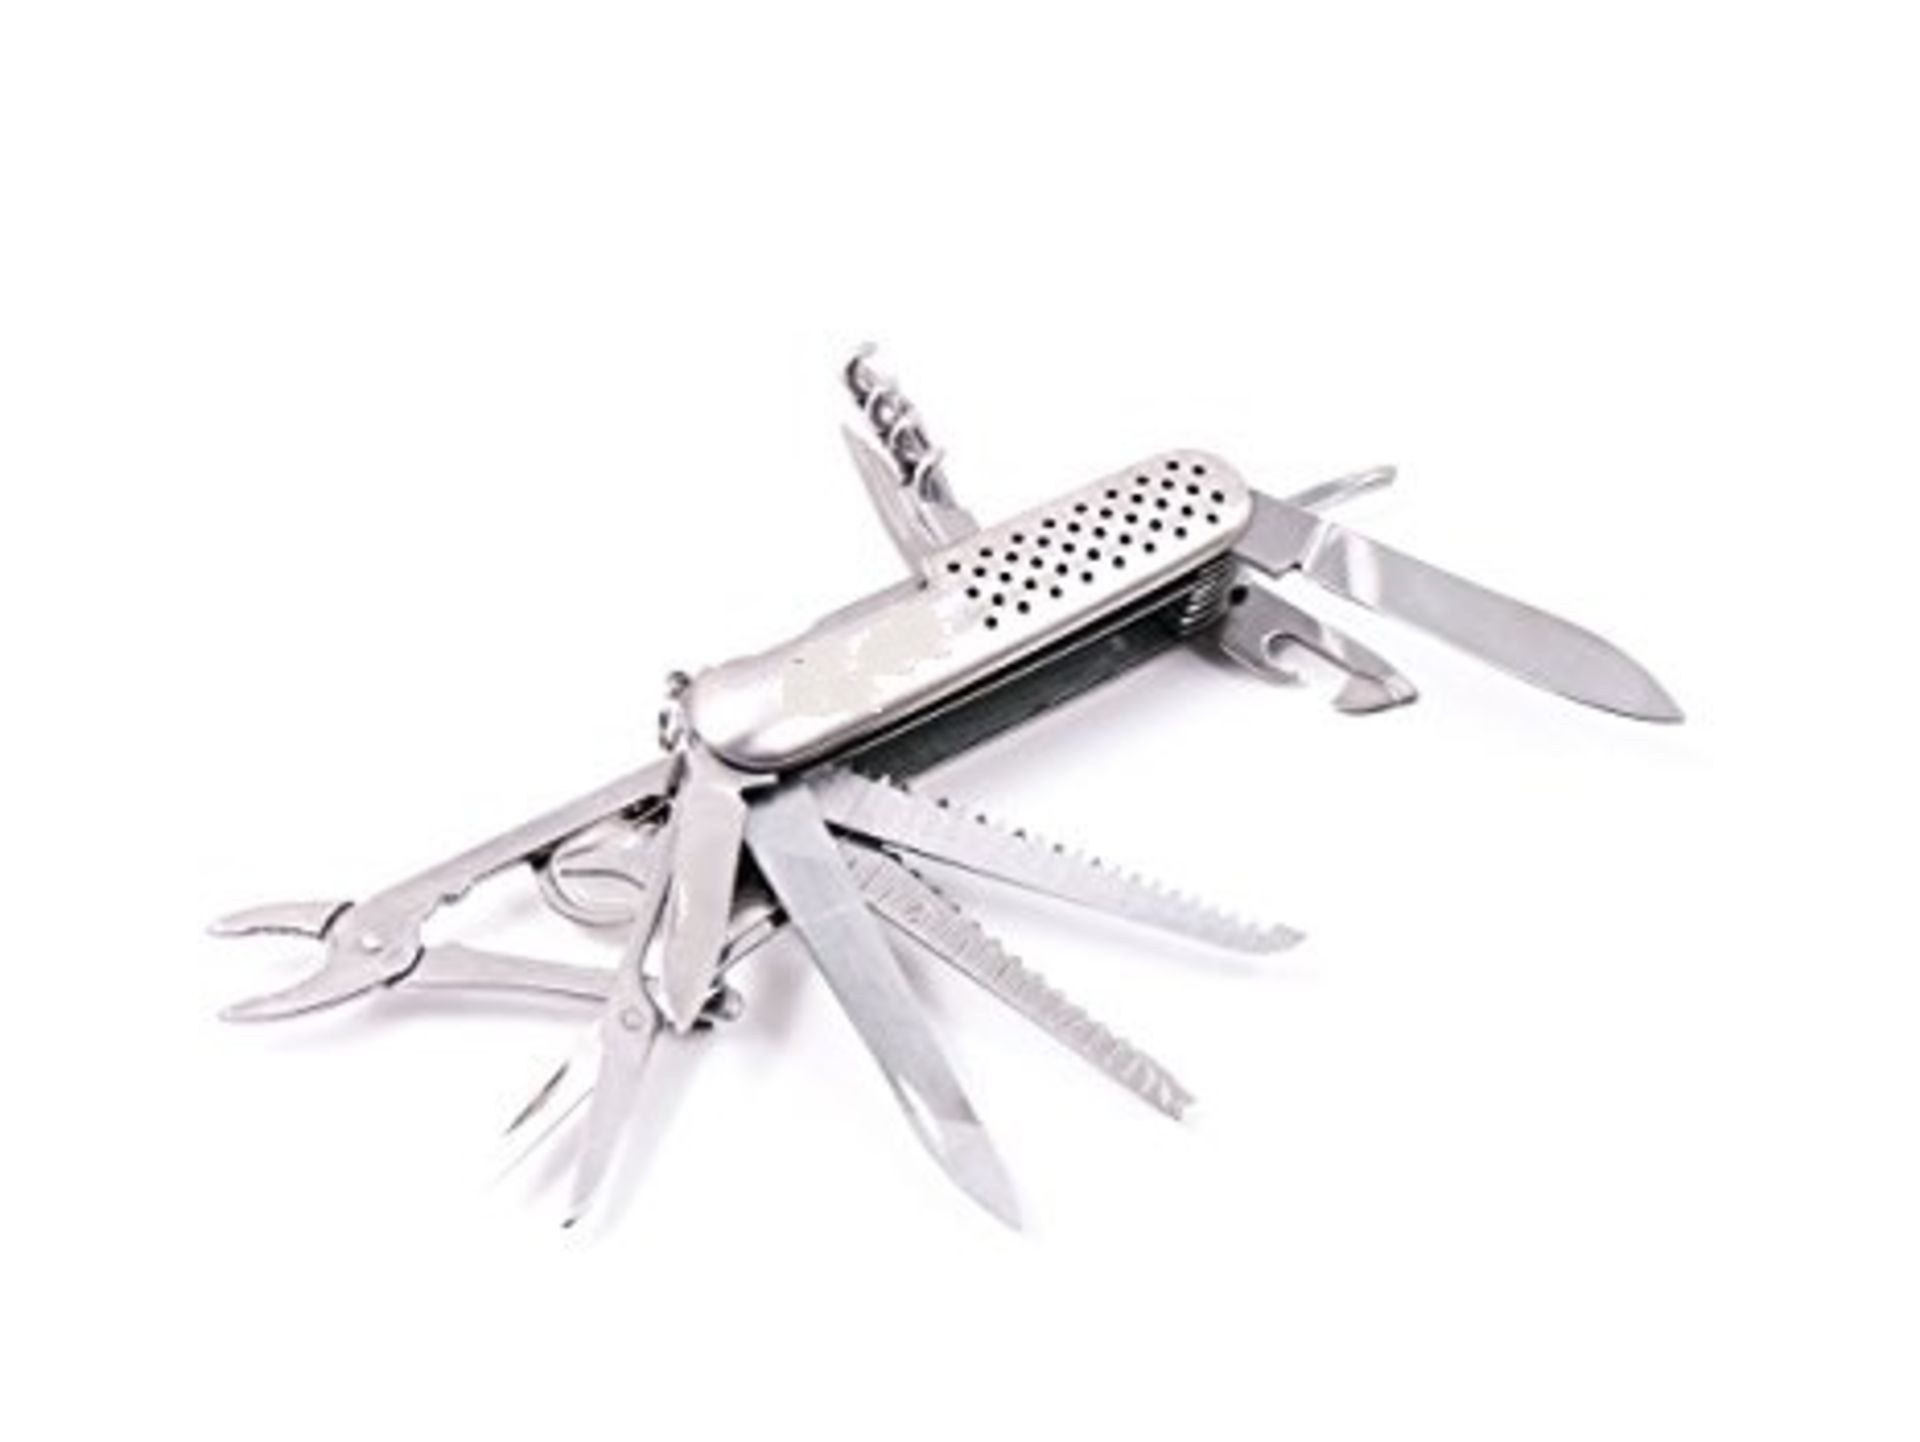 V Brand New Multi Tool 21 in 1 Stainless Steel Multi Tool - Perfect For Camping, Hiking, Fishing etc